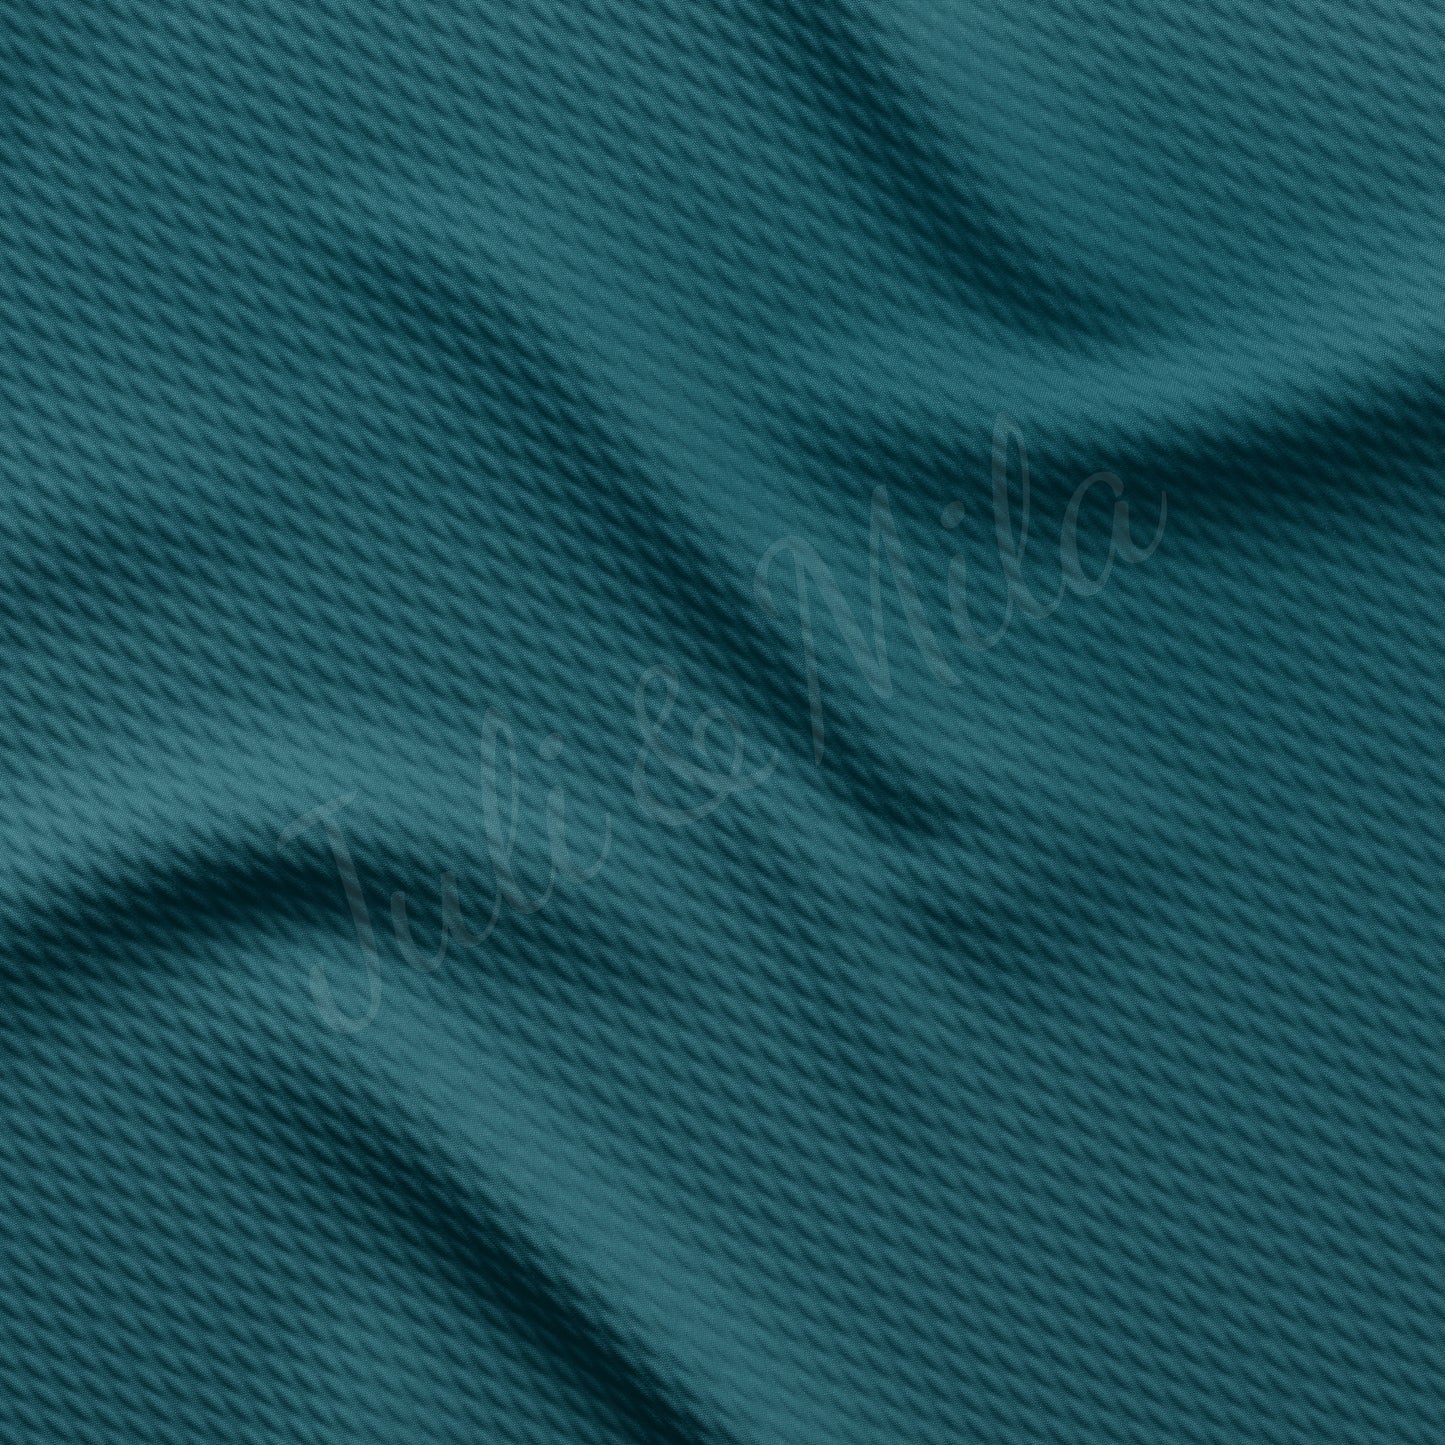 Peacock Liverpool Bullet Textured Fabric